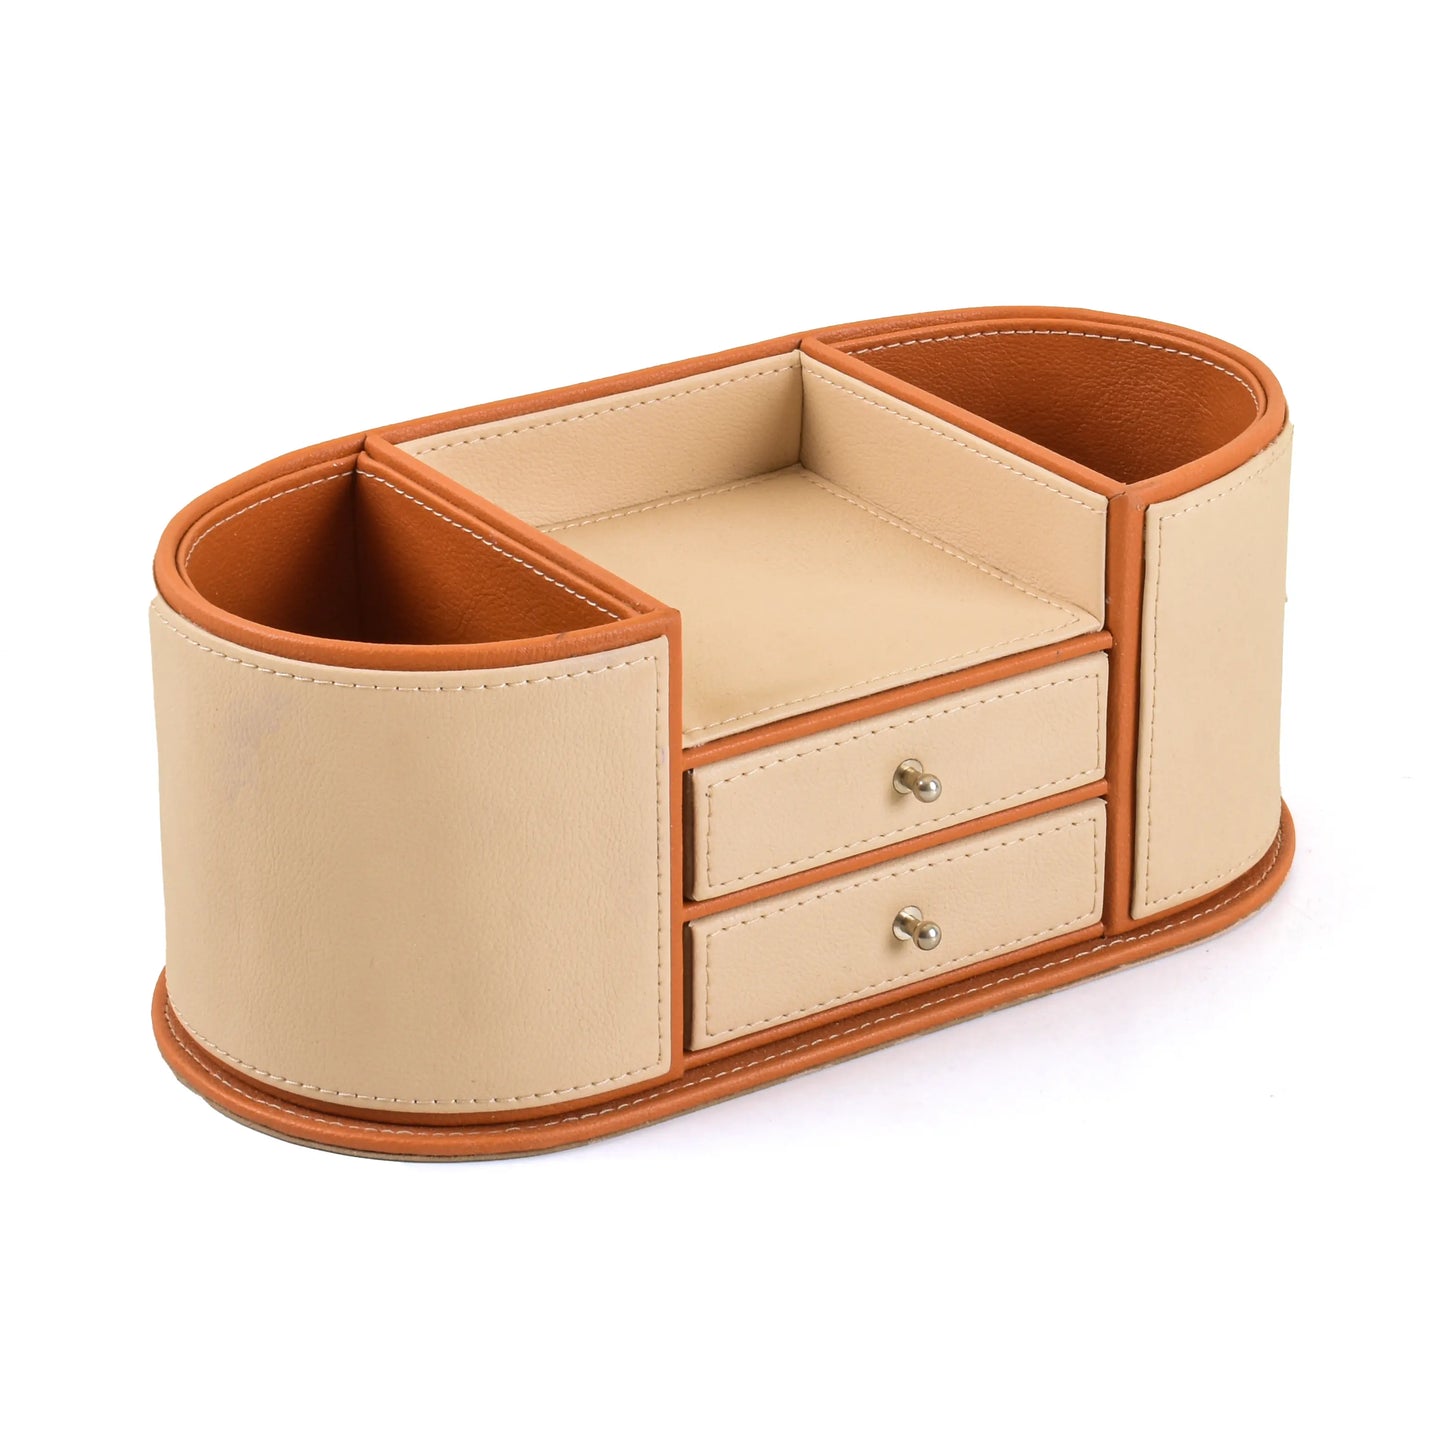 Leatherette Office Table Organiser with Storage Drawers | Beige | Axis 2.0 ICHKAN